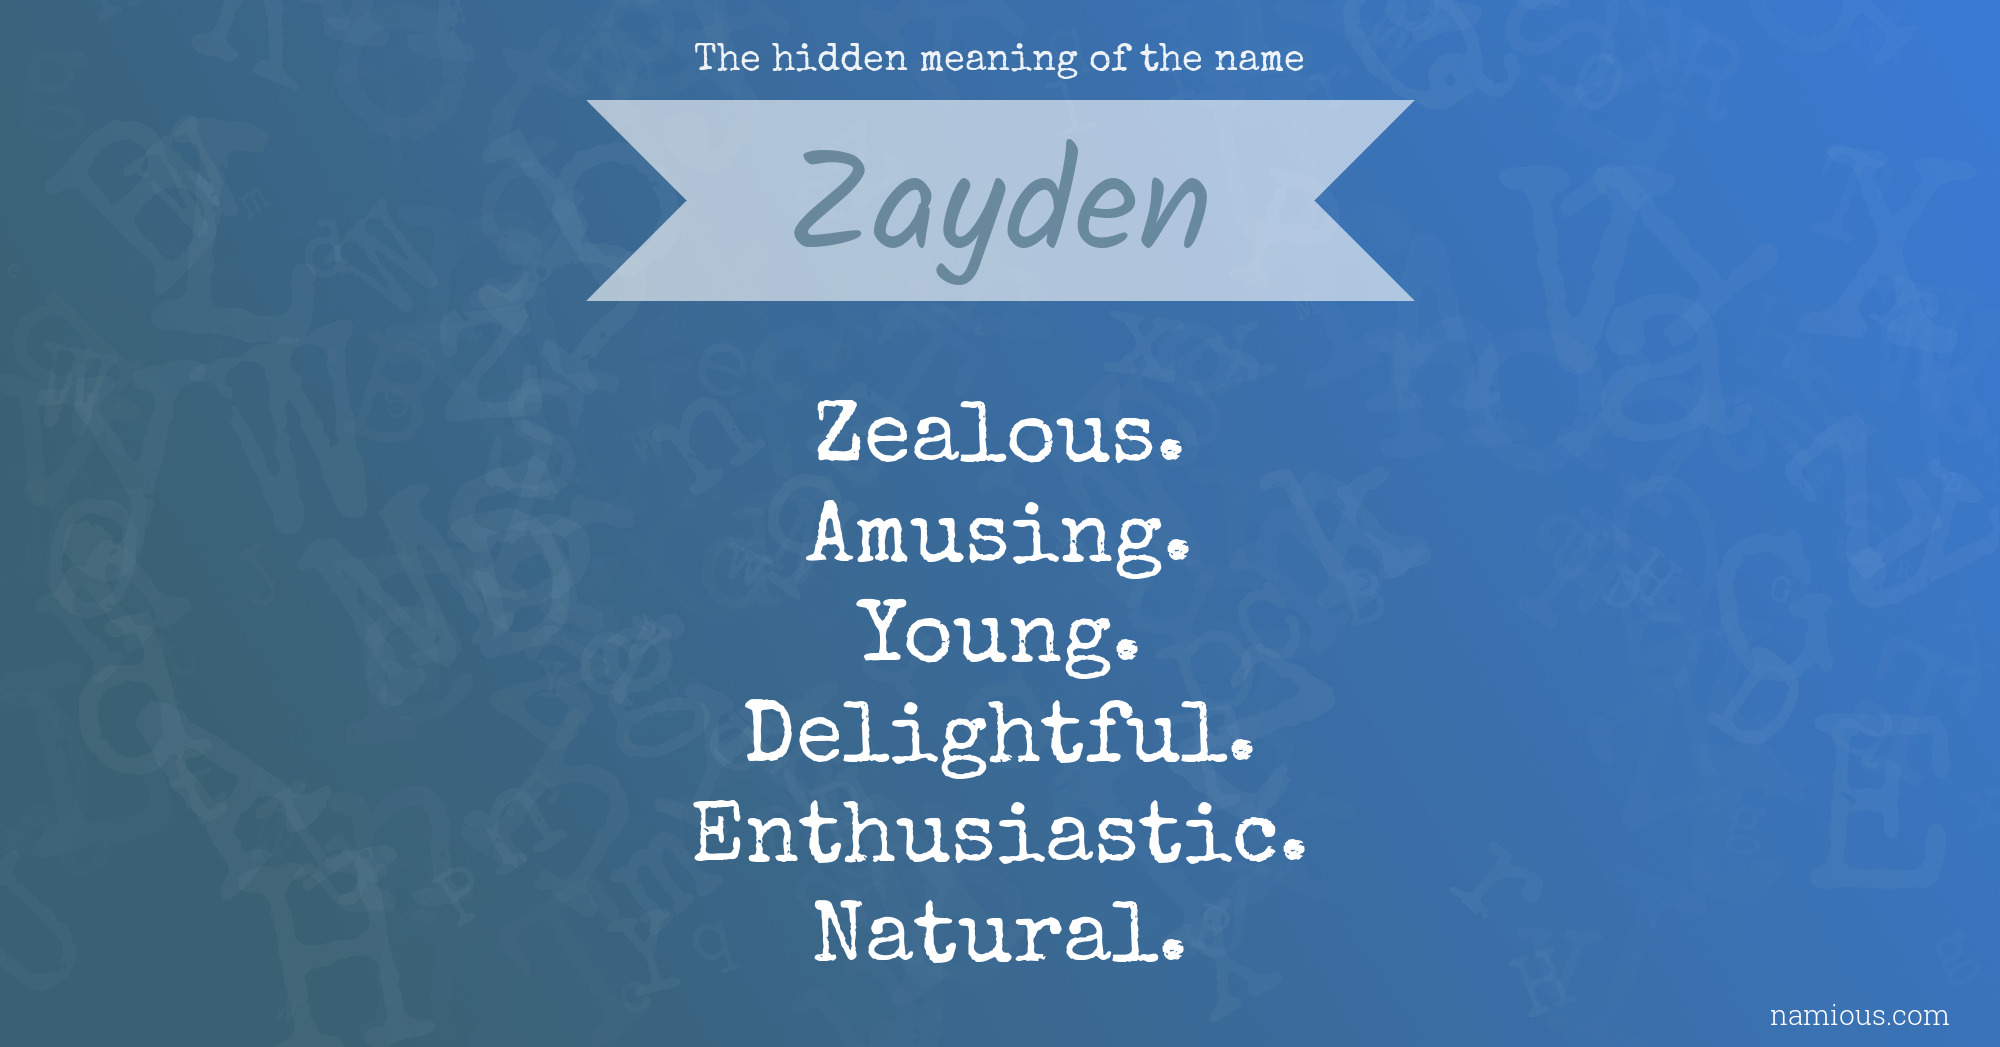 The hidden meaning of the name Zayden